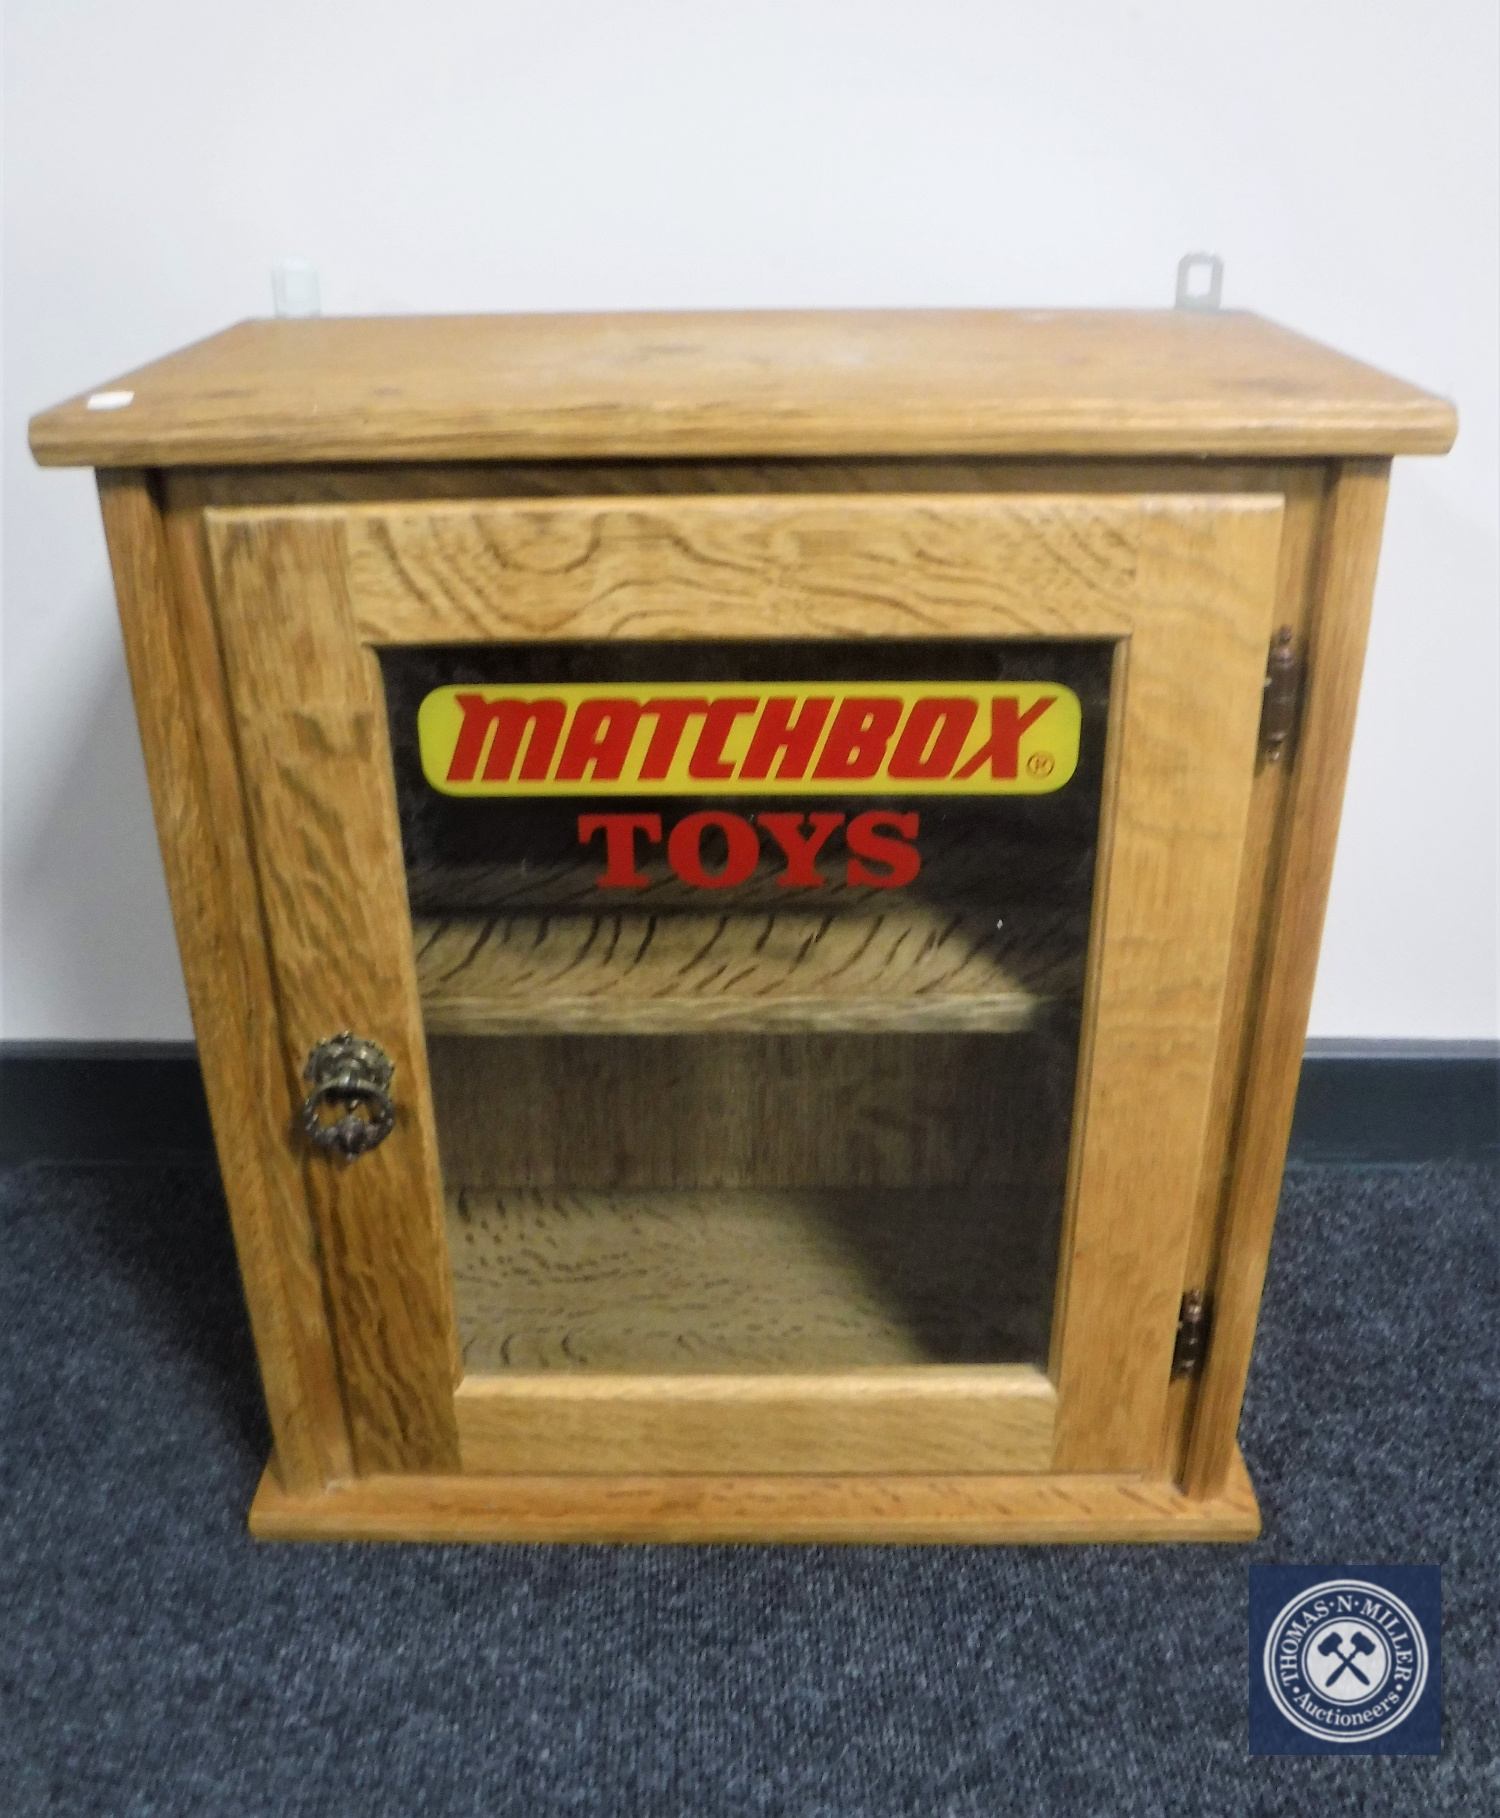 A blonde oak single door wall cabinet with "Matchbox Toys" advertising